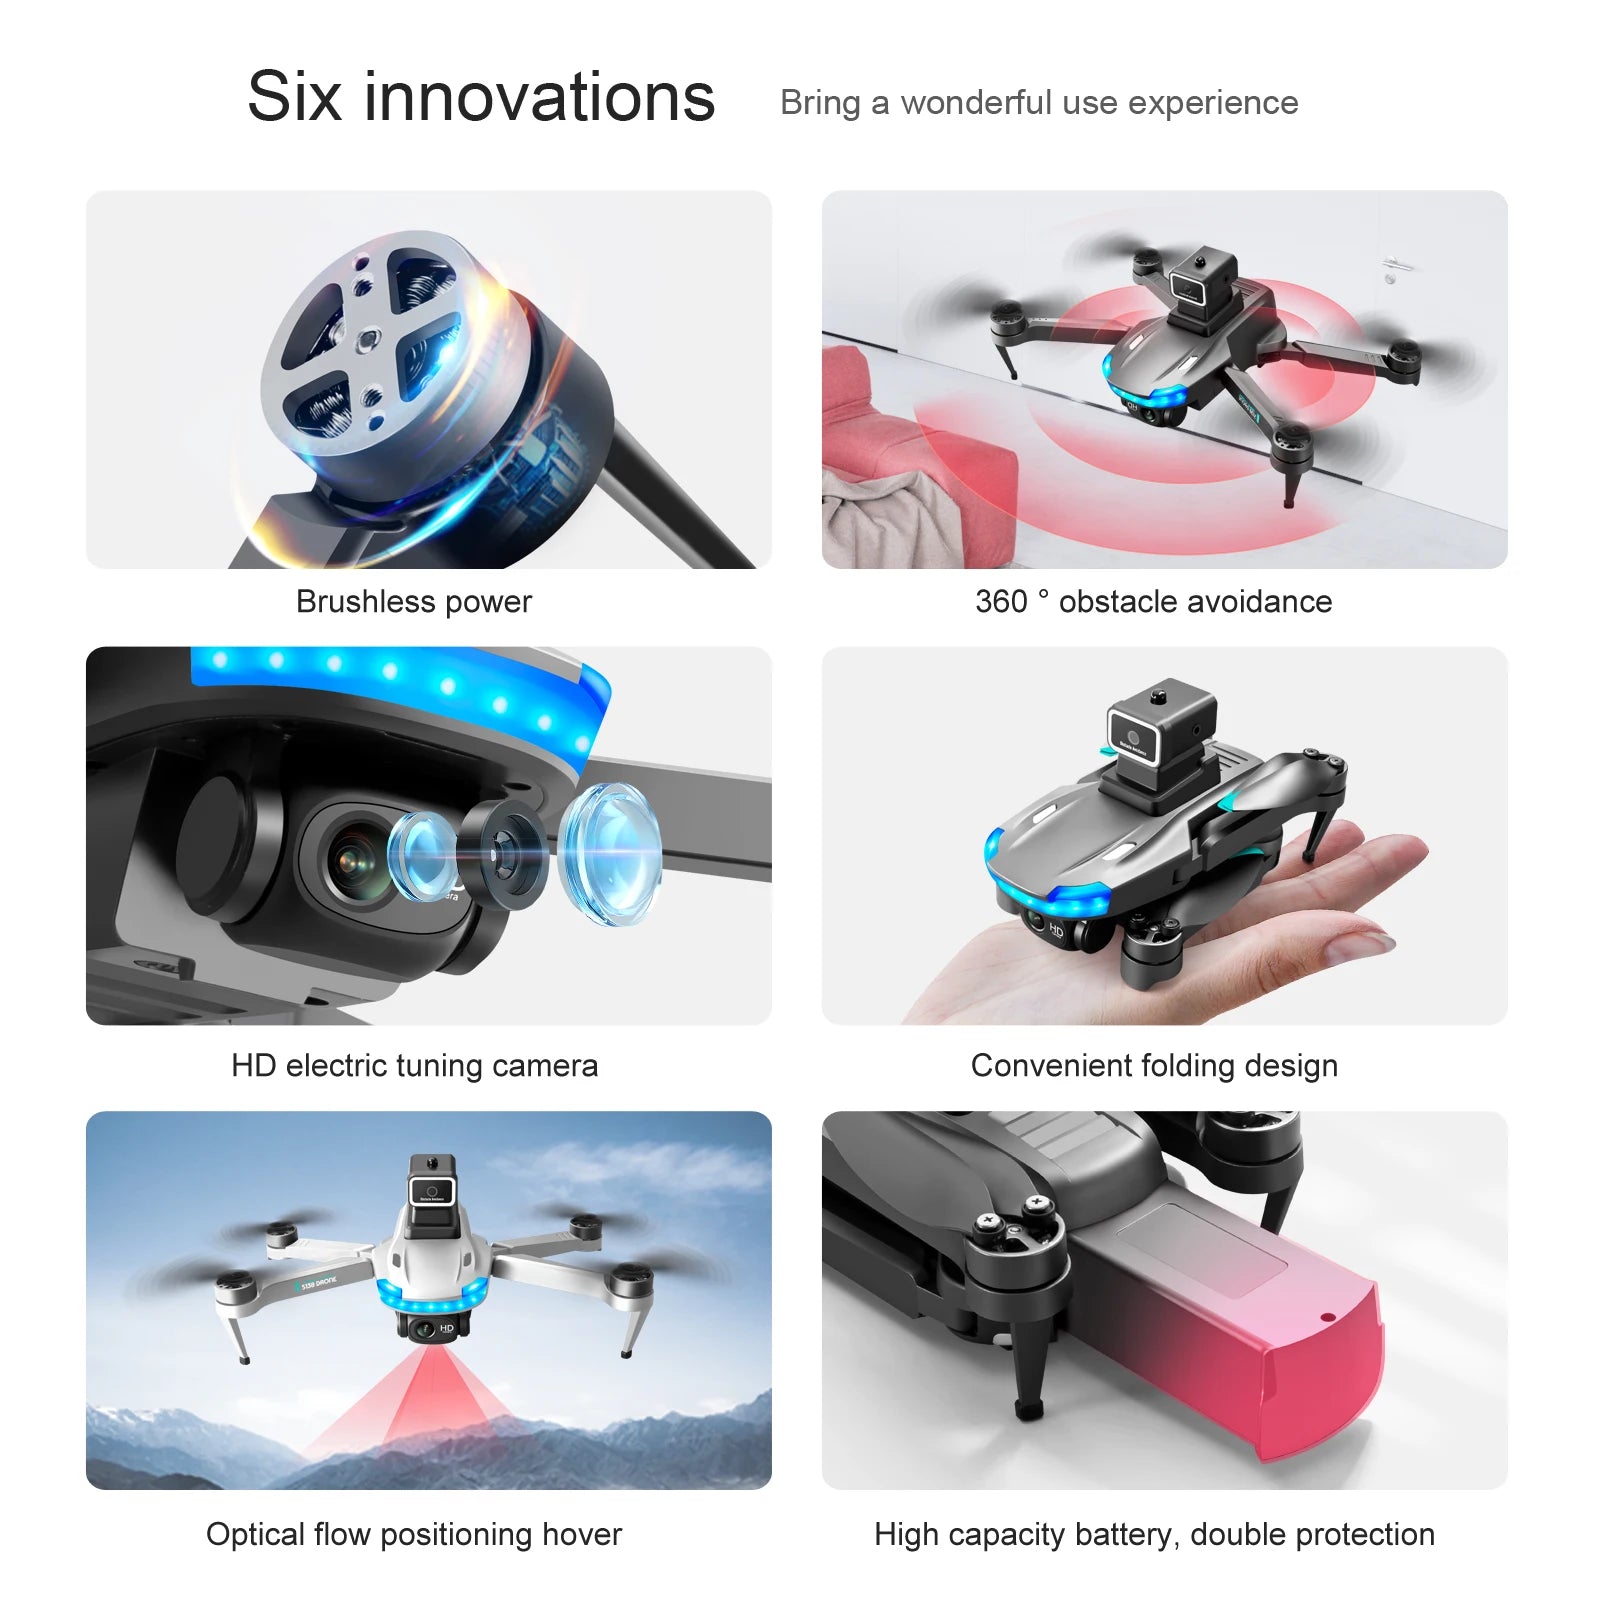 S138 Drone, six innovations bring a wonderful use experience brushless power 360 obstacle avoid